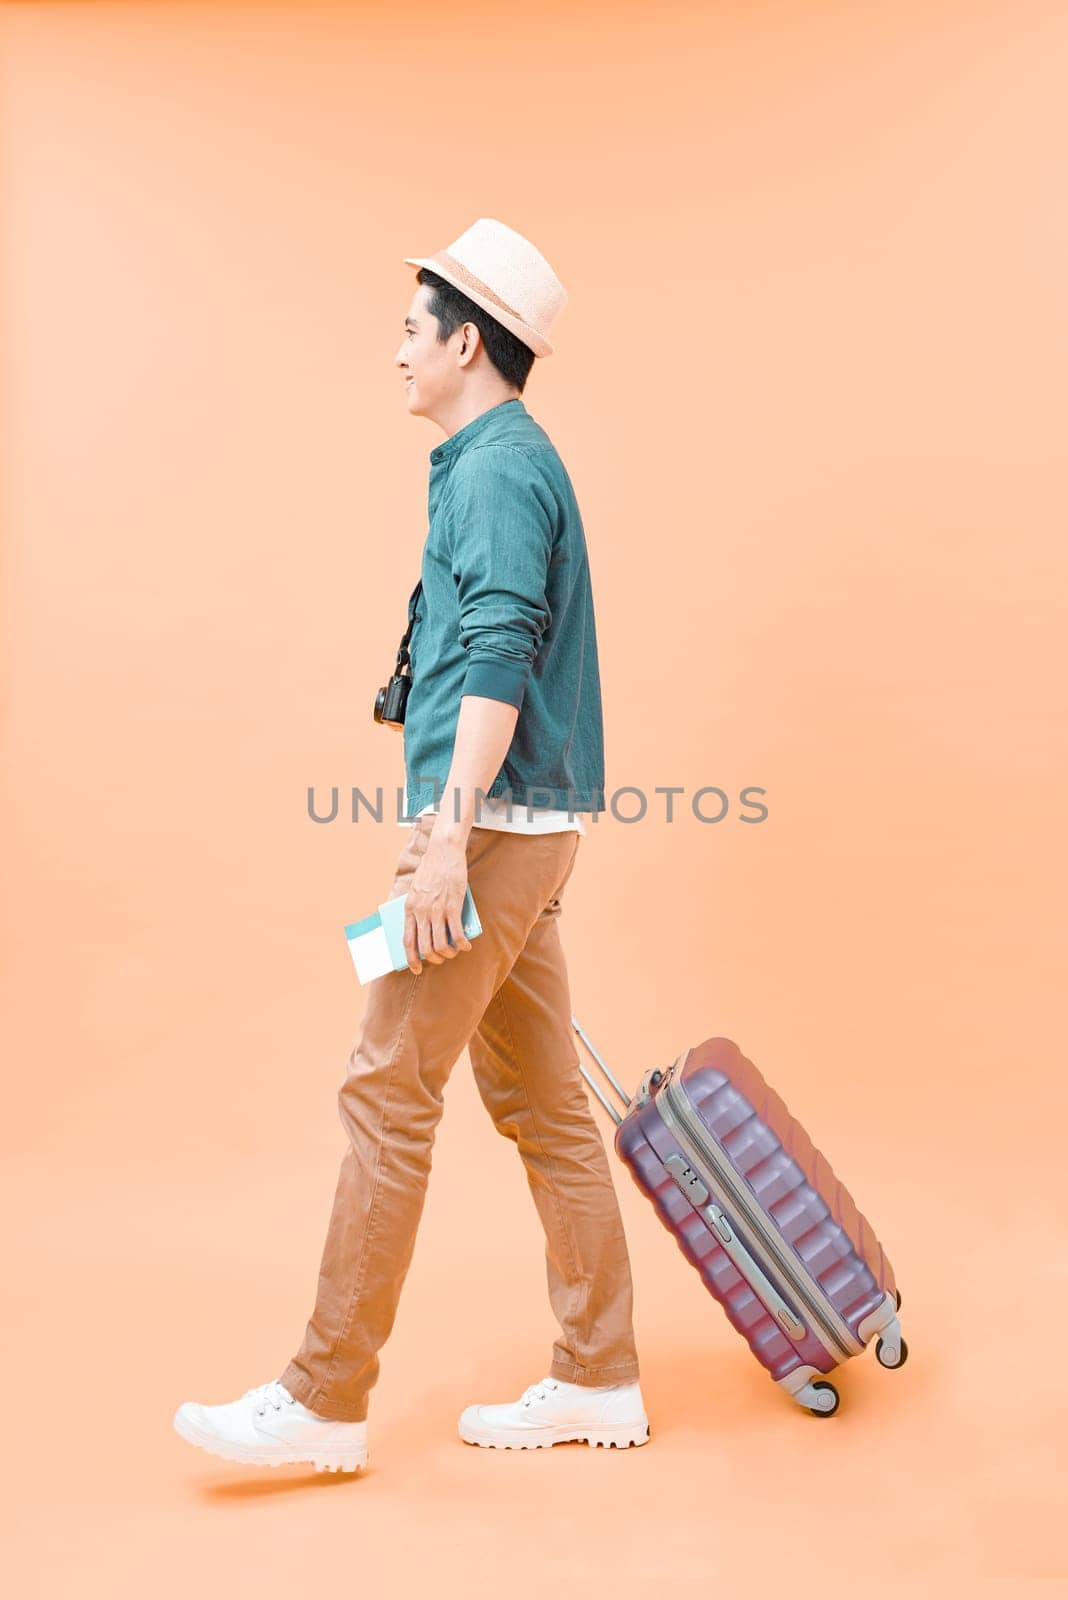 Full length of young asian man walking with the travel bag, isolated on color background